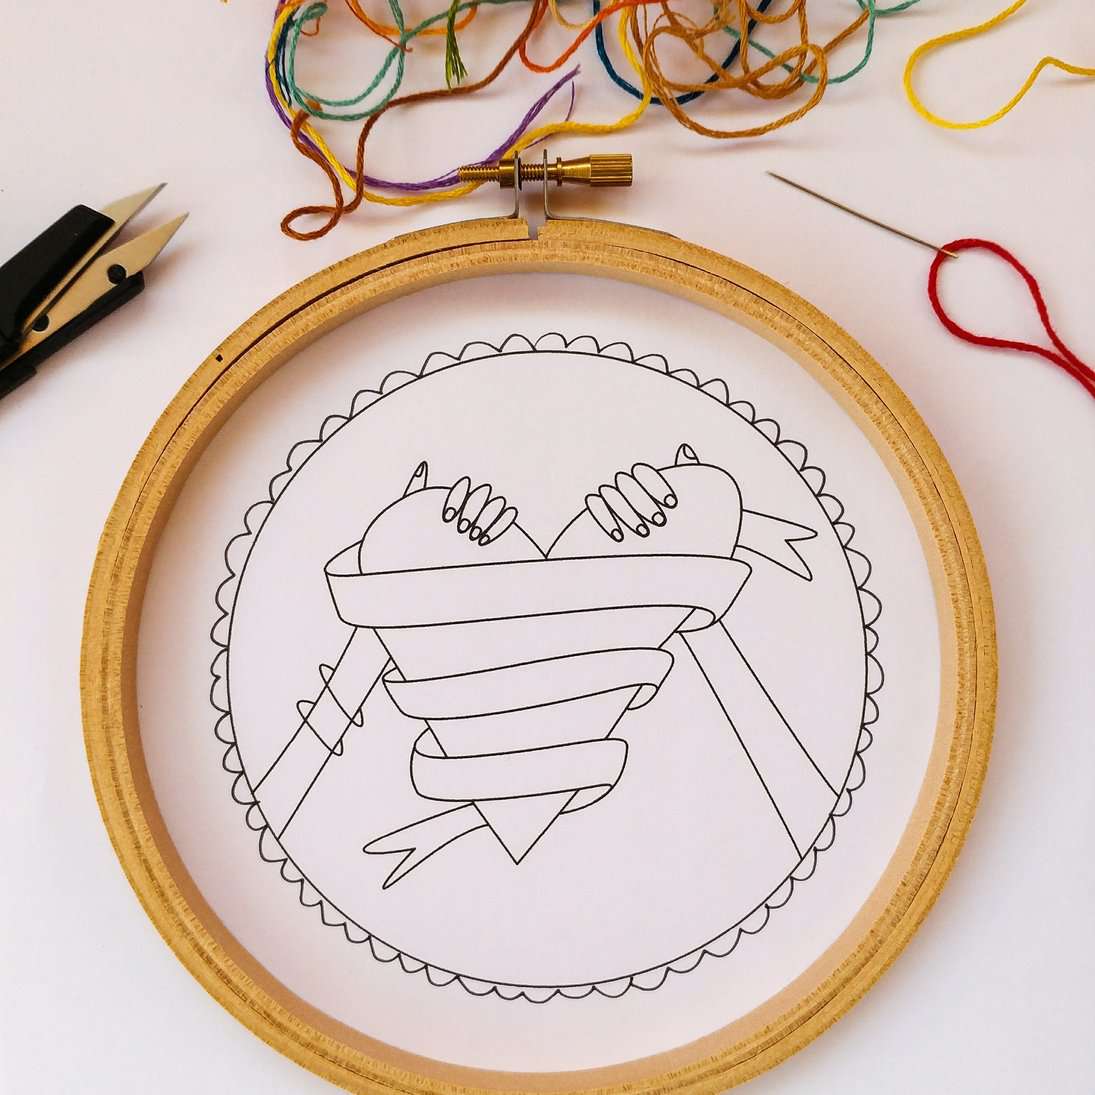 Share the Love Hand Embroidery Pattern